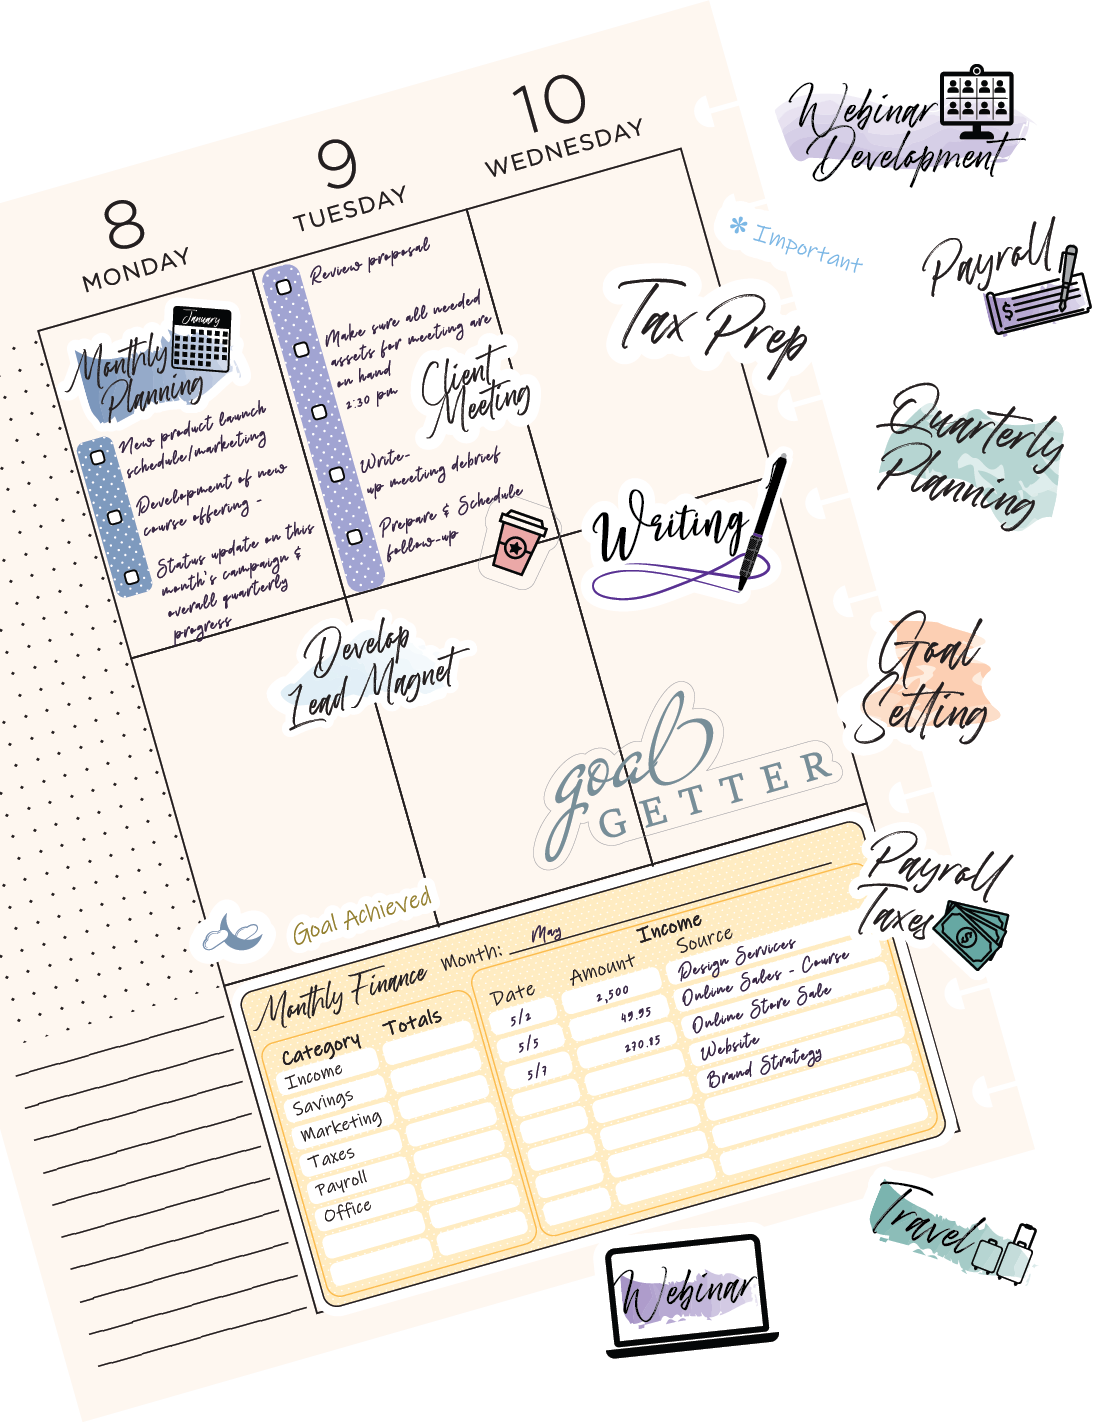 Sample planner page